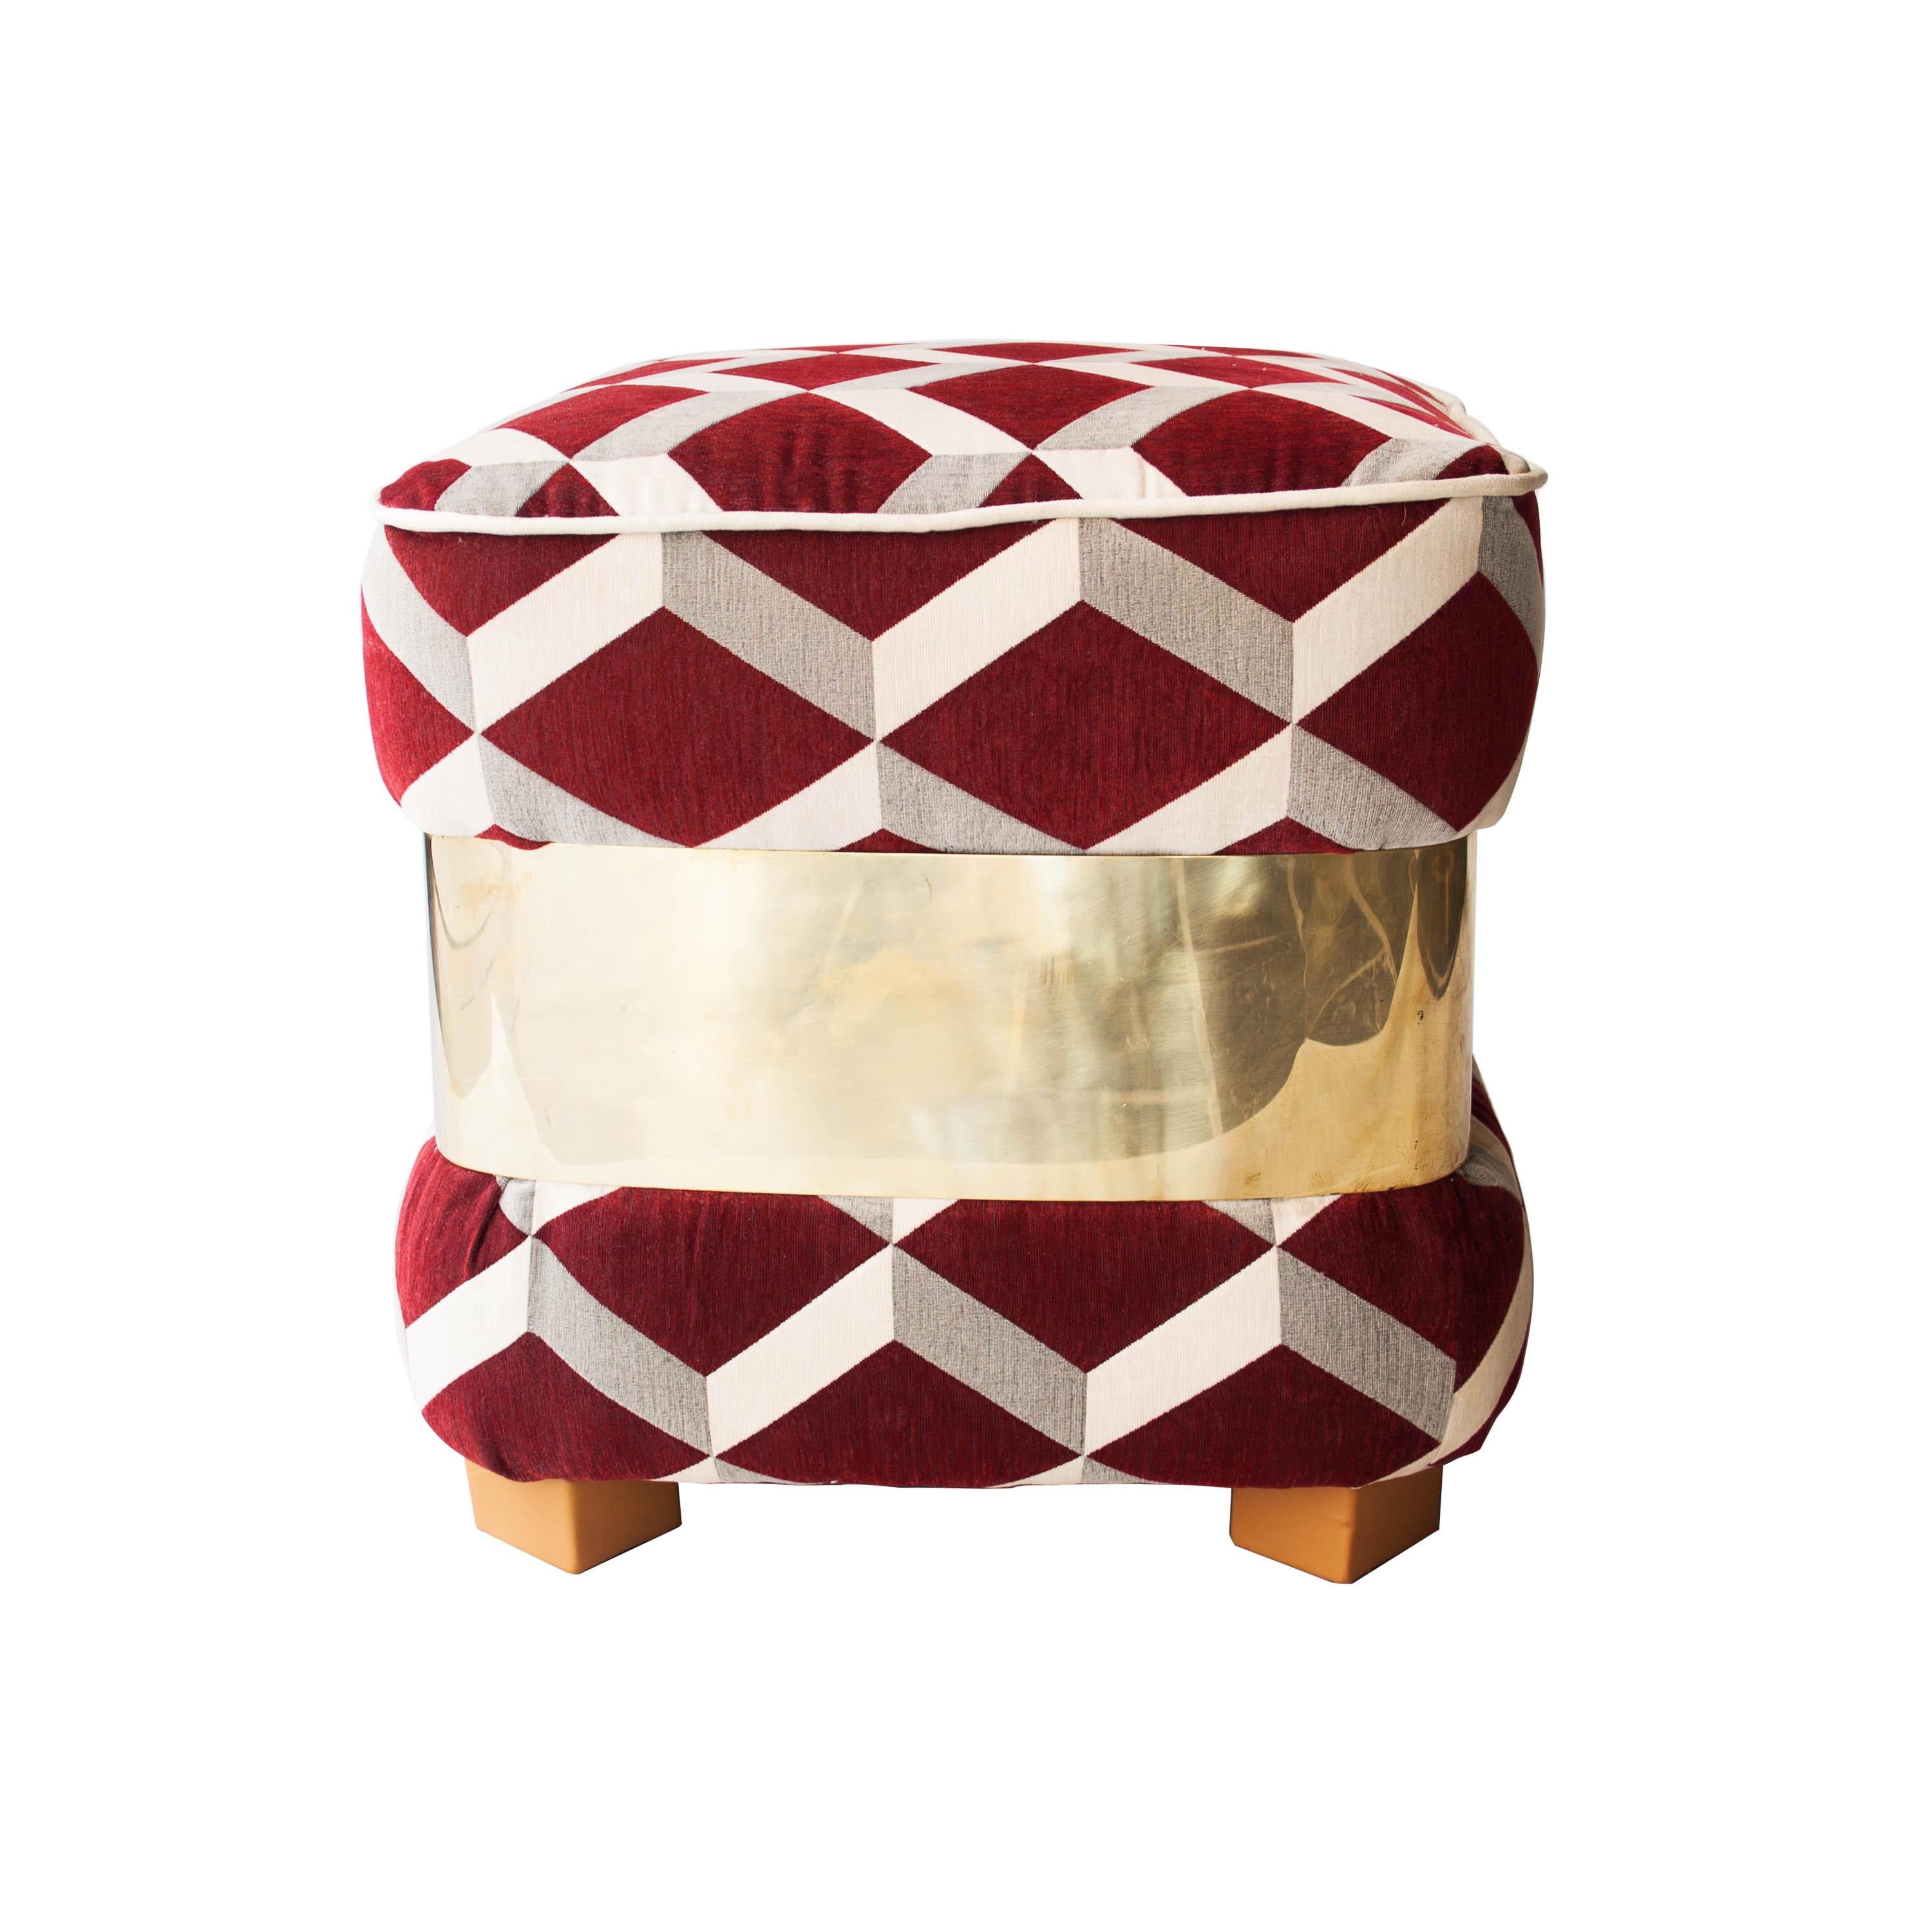 Square, made of solid wood structure pouf white cotton upholstery with geometric embroidery by Jo MALONE, and brass band. Finished in leather legs.

   